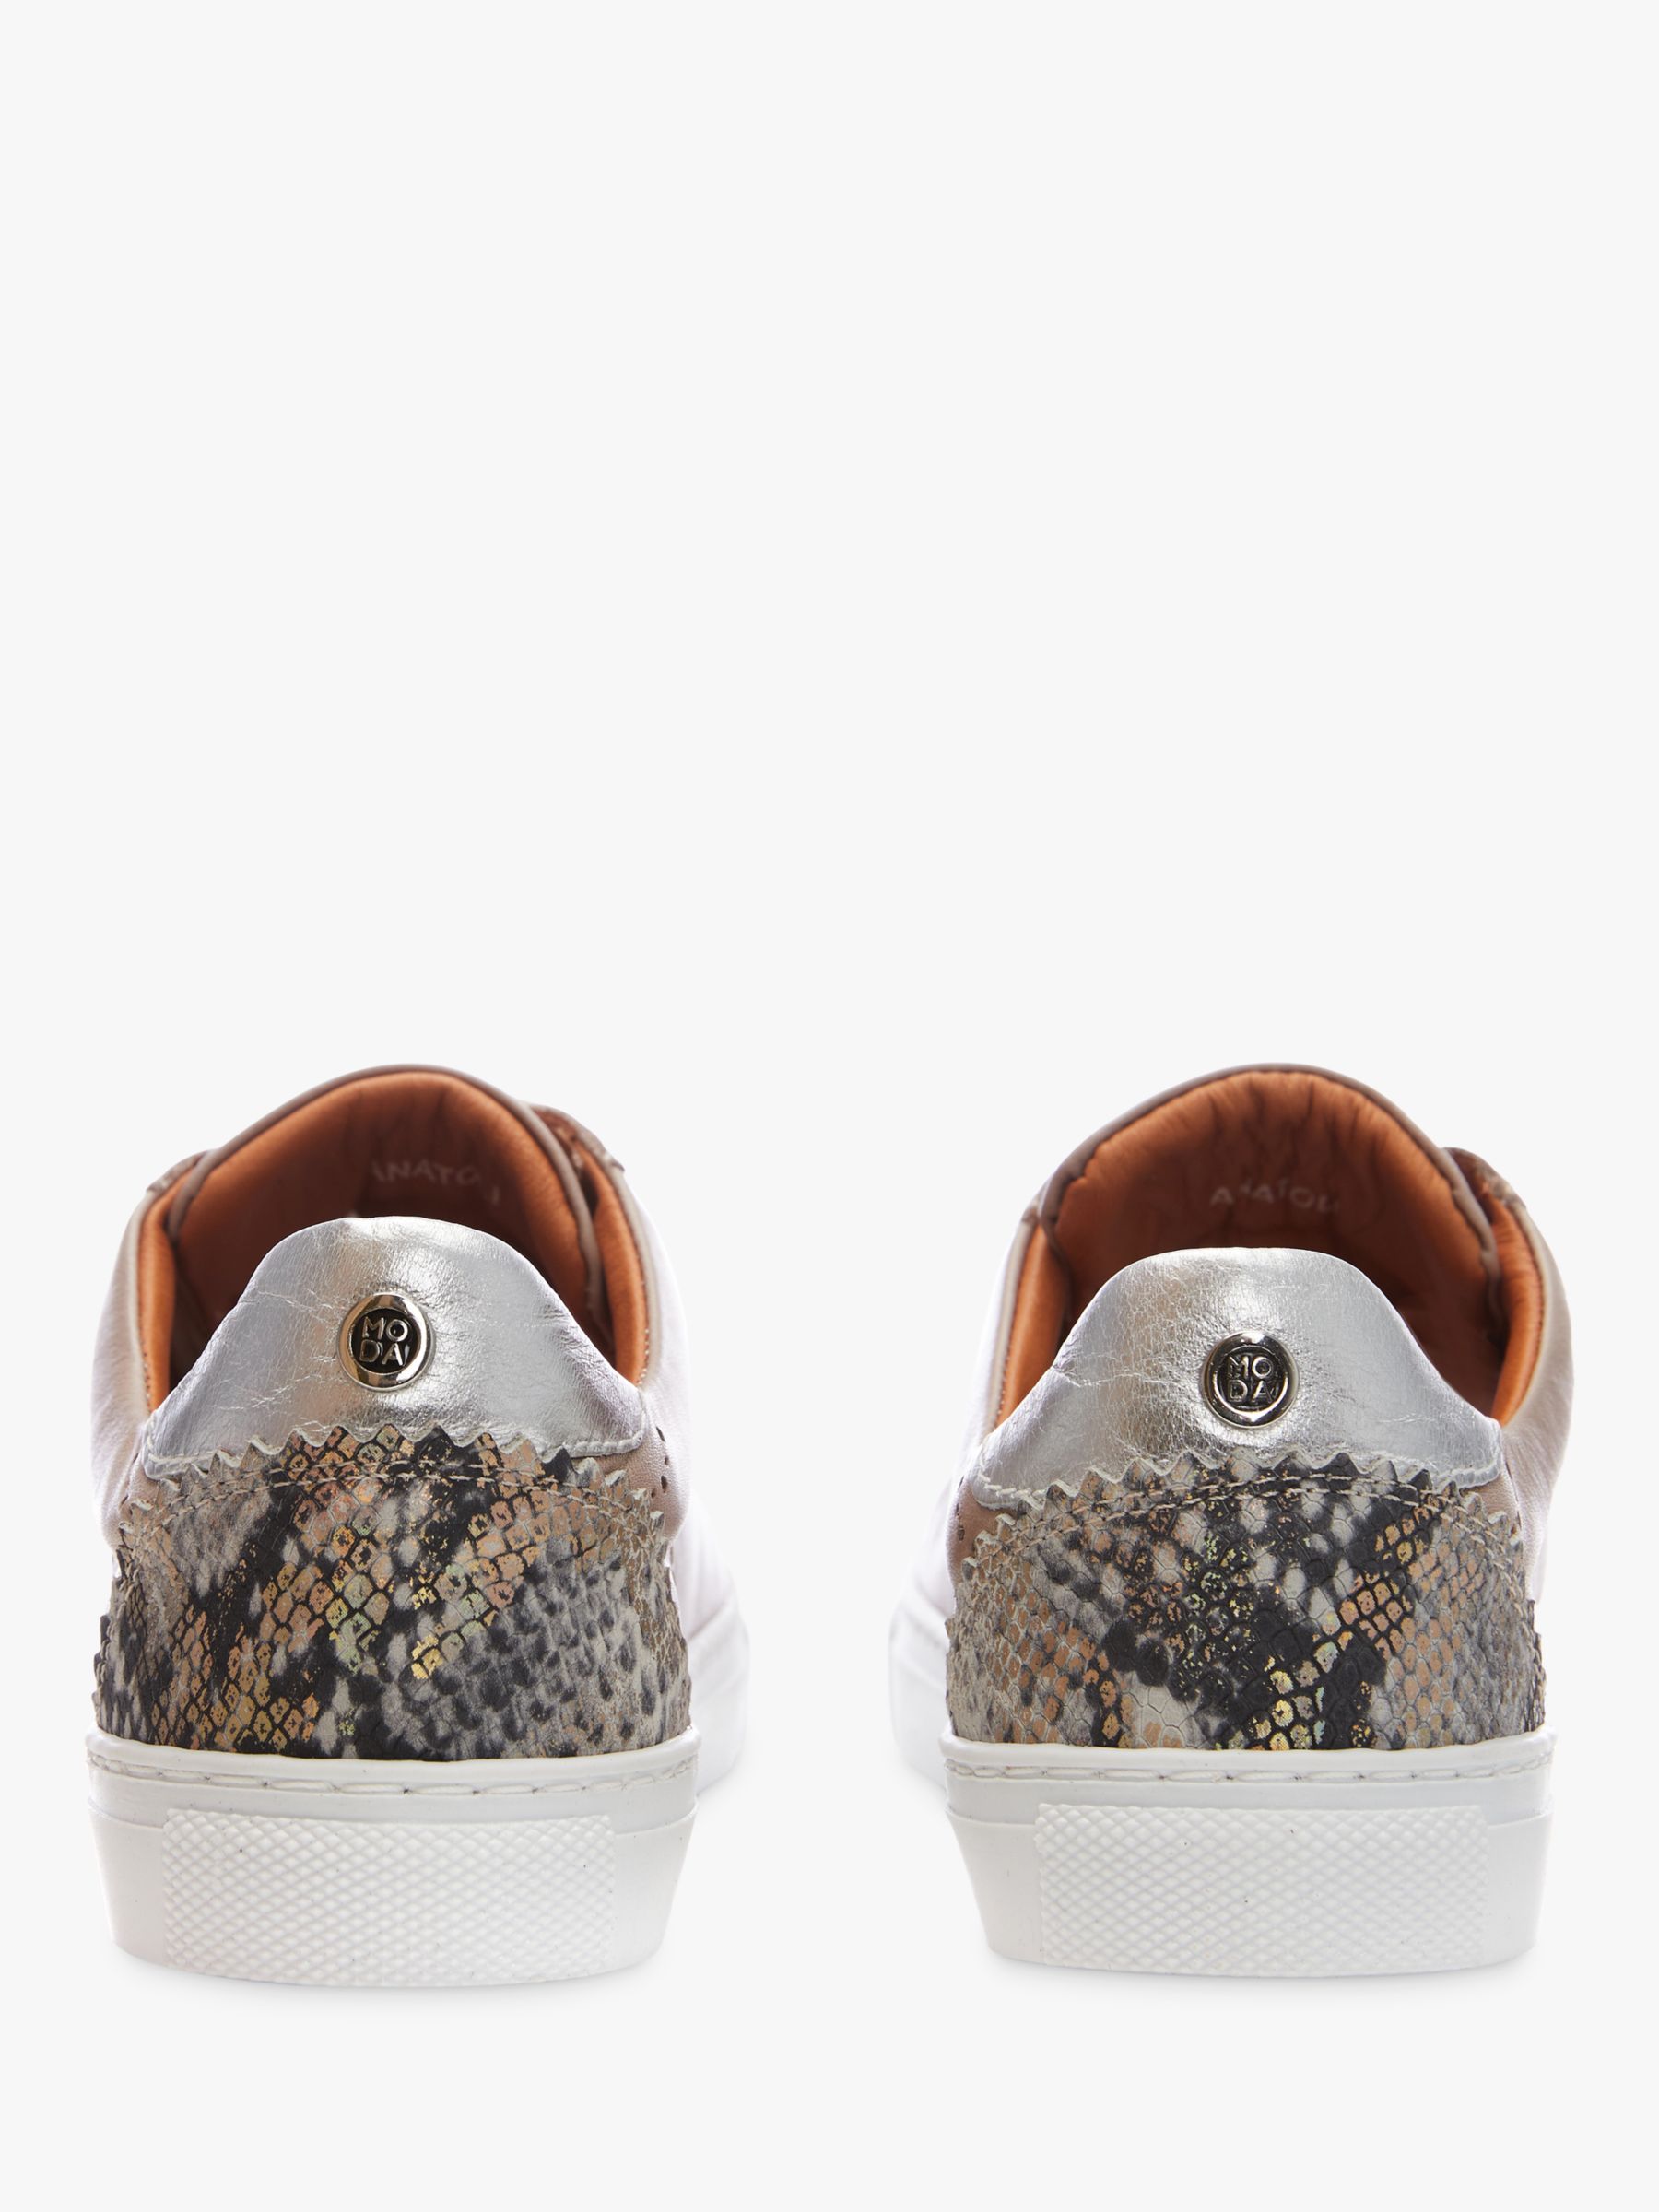 Buy Moda in Pelle Anatoli Leather Lace Up Trainers Online at johnlewis.com